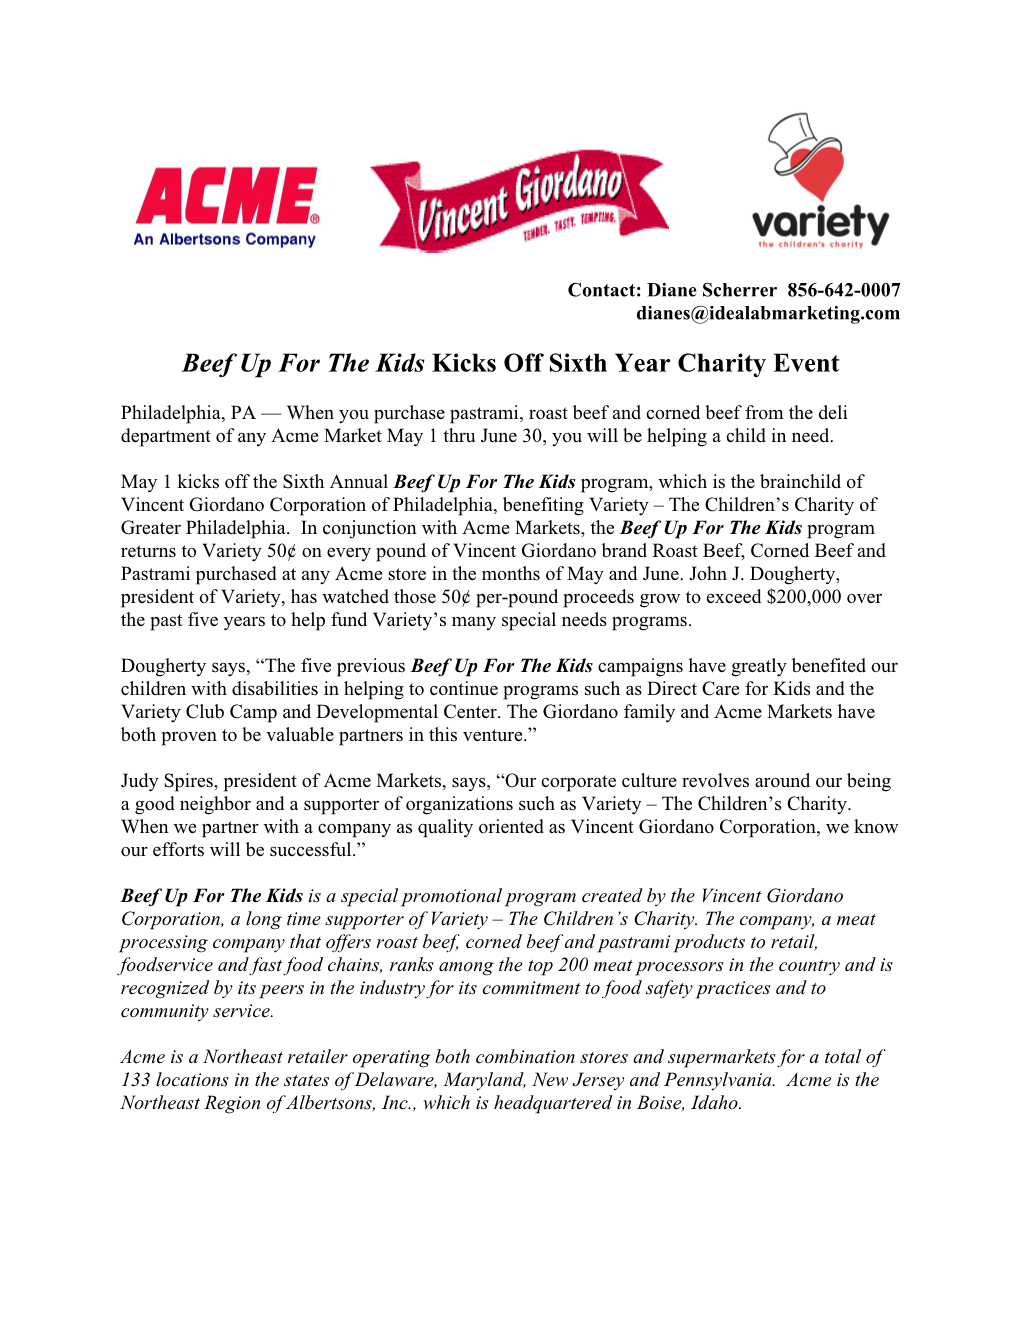 Variety Club Delaware Valley Tent Announces the May 1, 2004 Launch of the 4Th Annual Beef